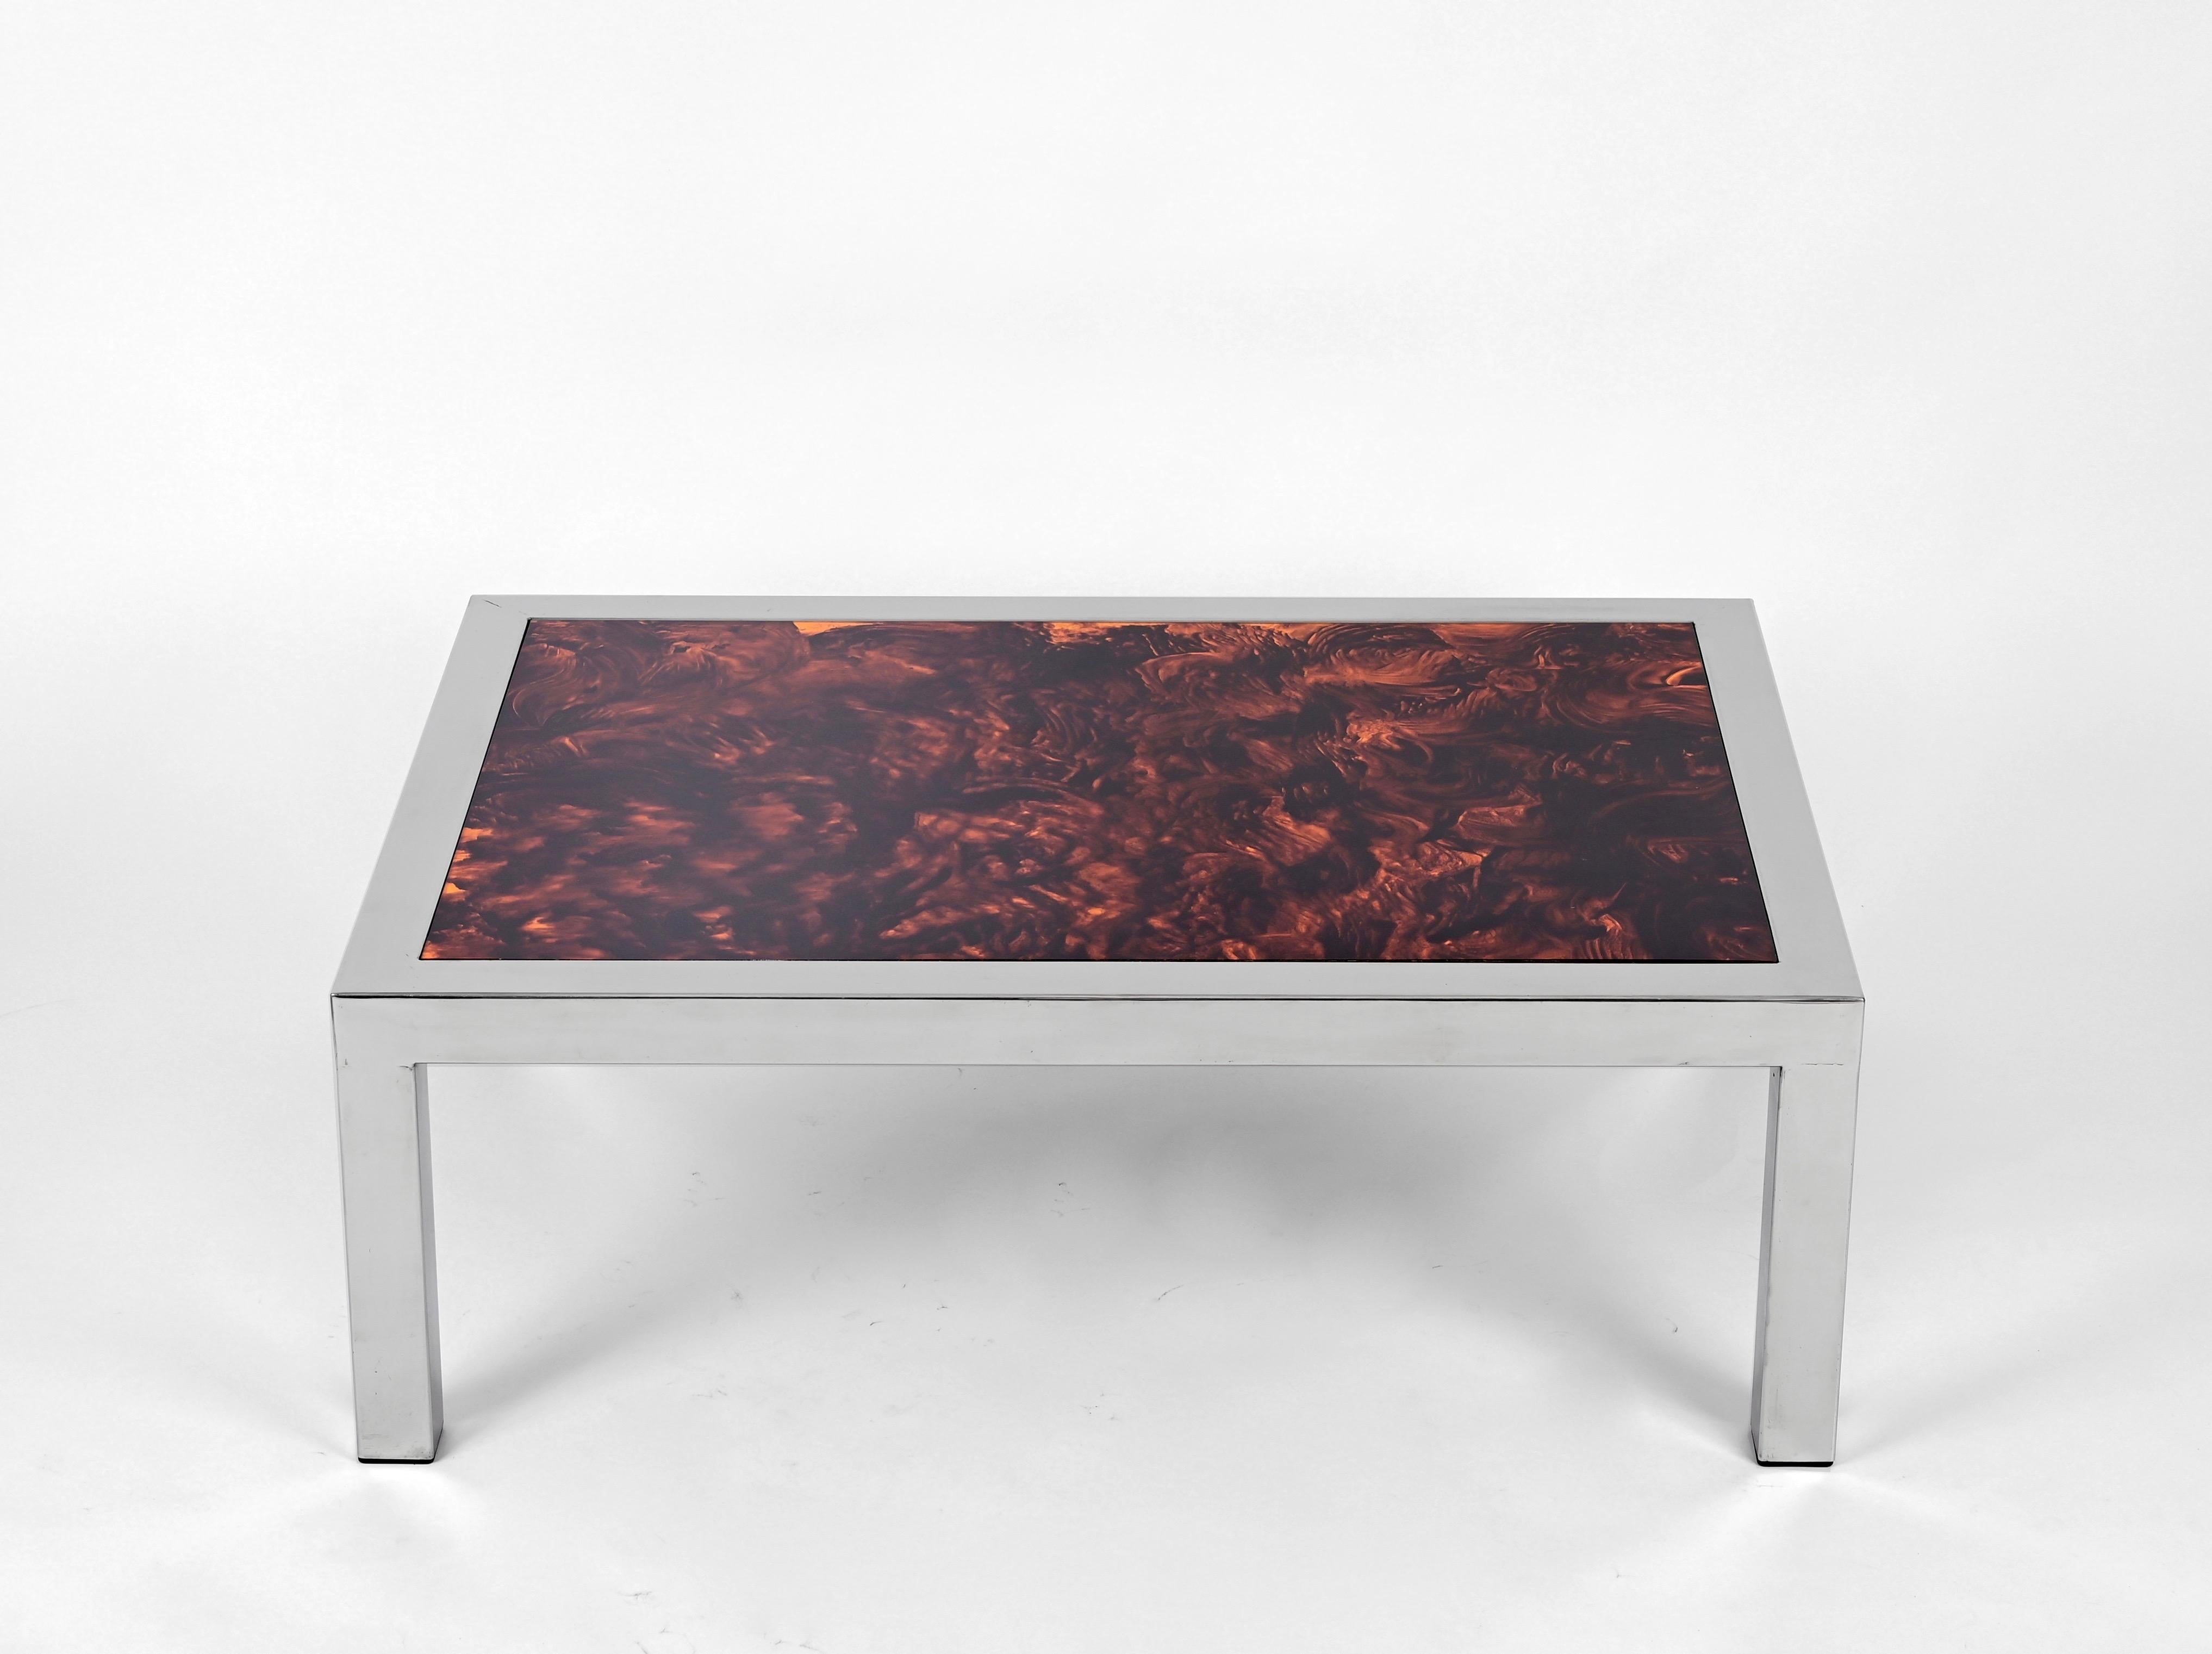 Italian Chromed Steel and Tortoiseshell Effect Lucite Coffee Table, Italy 1970s For Sale